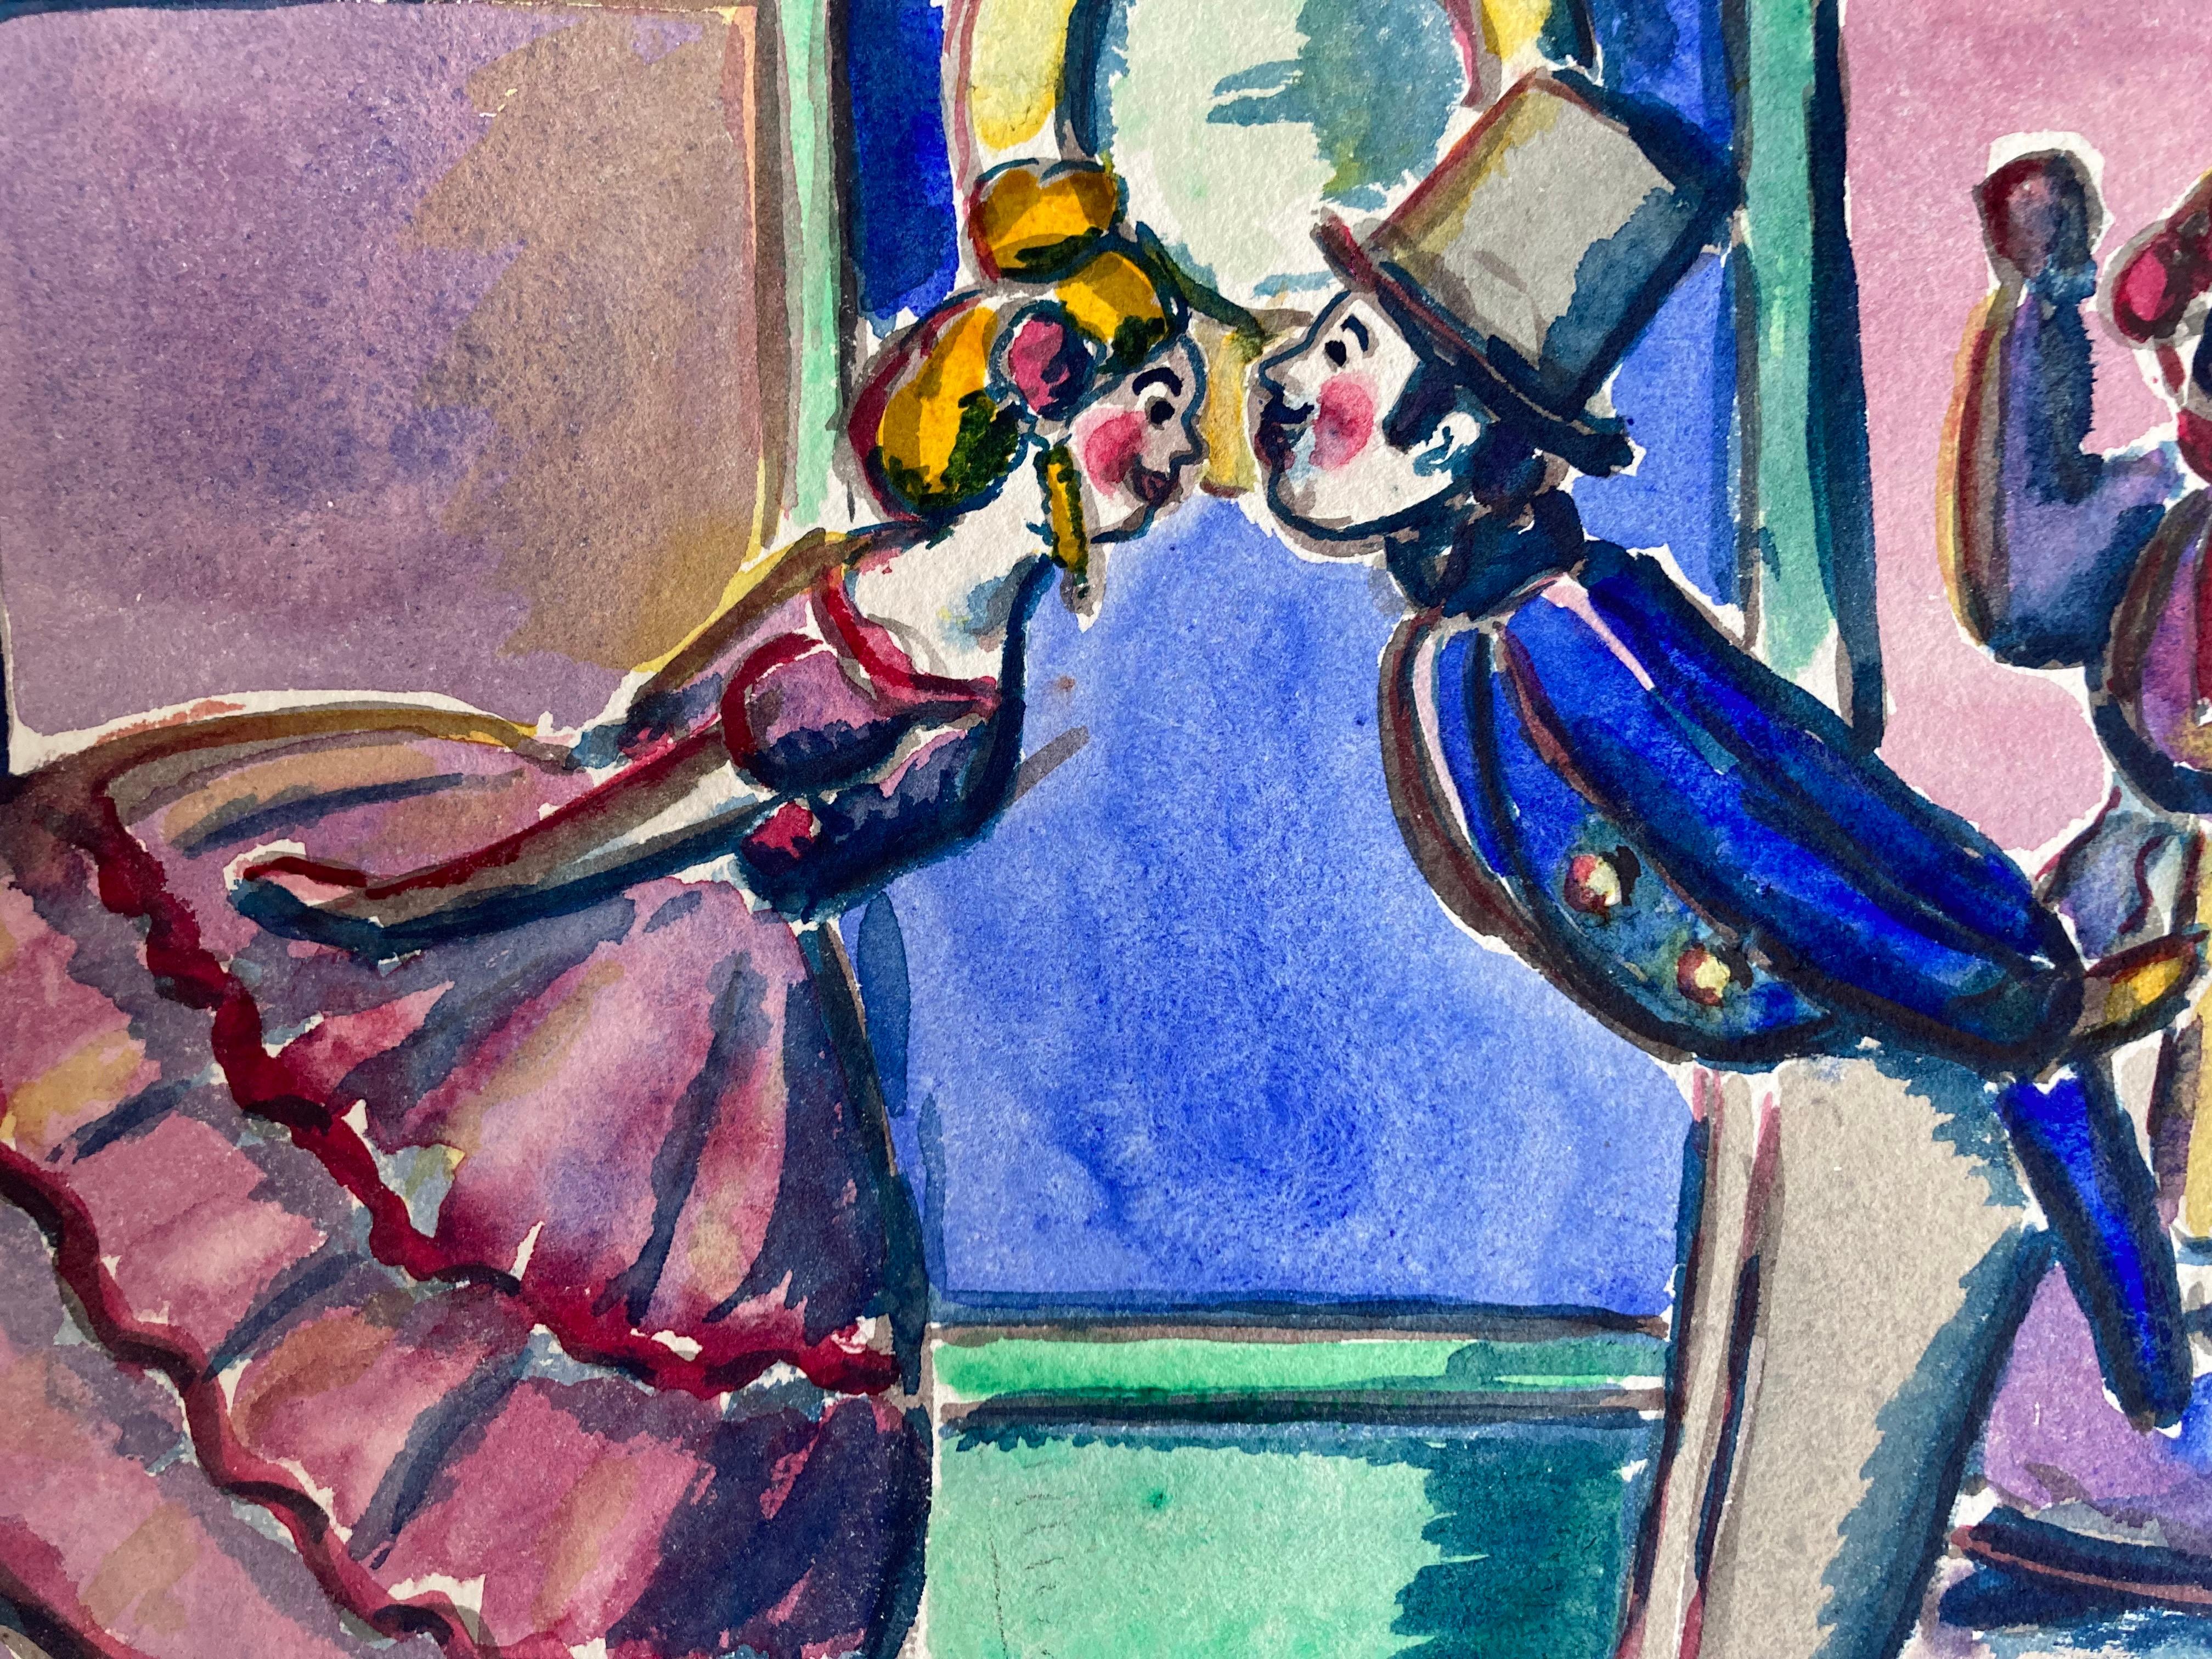 Les amants, original gouache on paper Loïs Hutton (1893-1972) dated on the back  - Painting by Lois Hutton